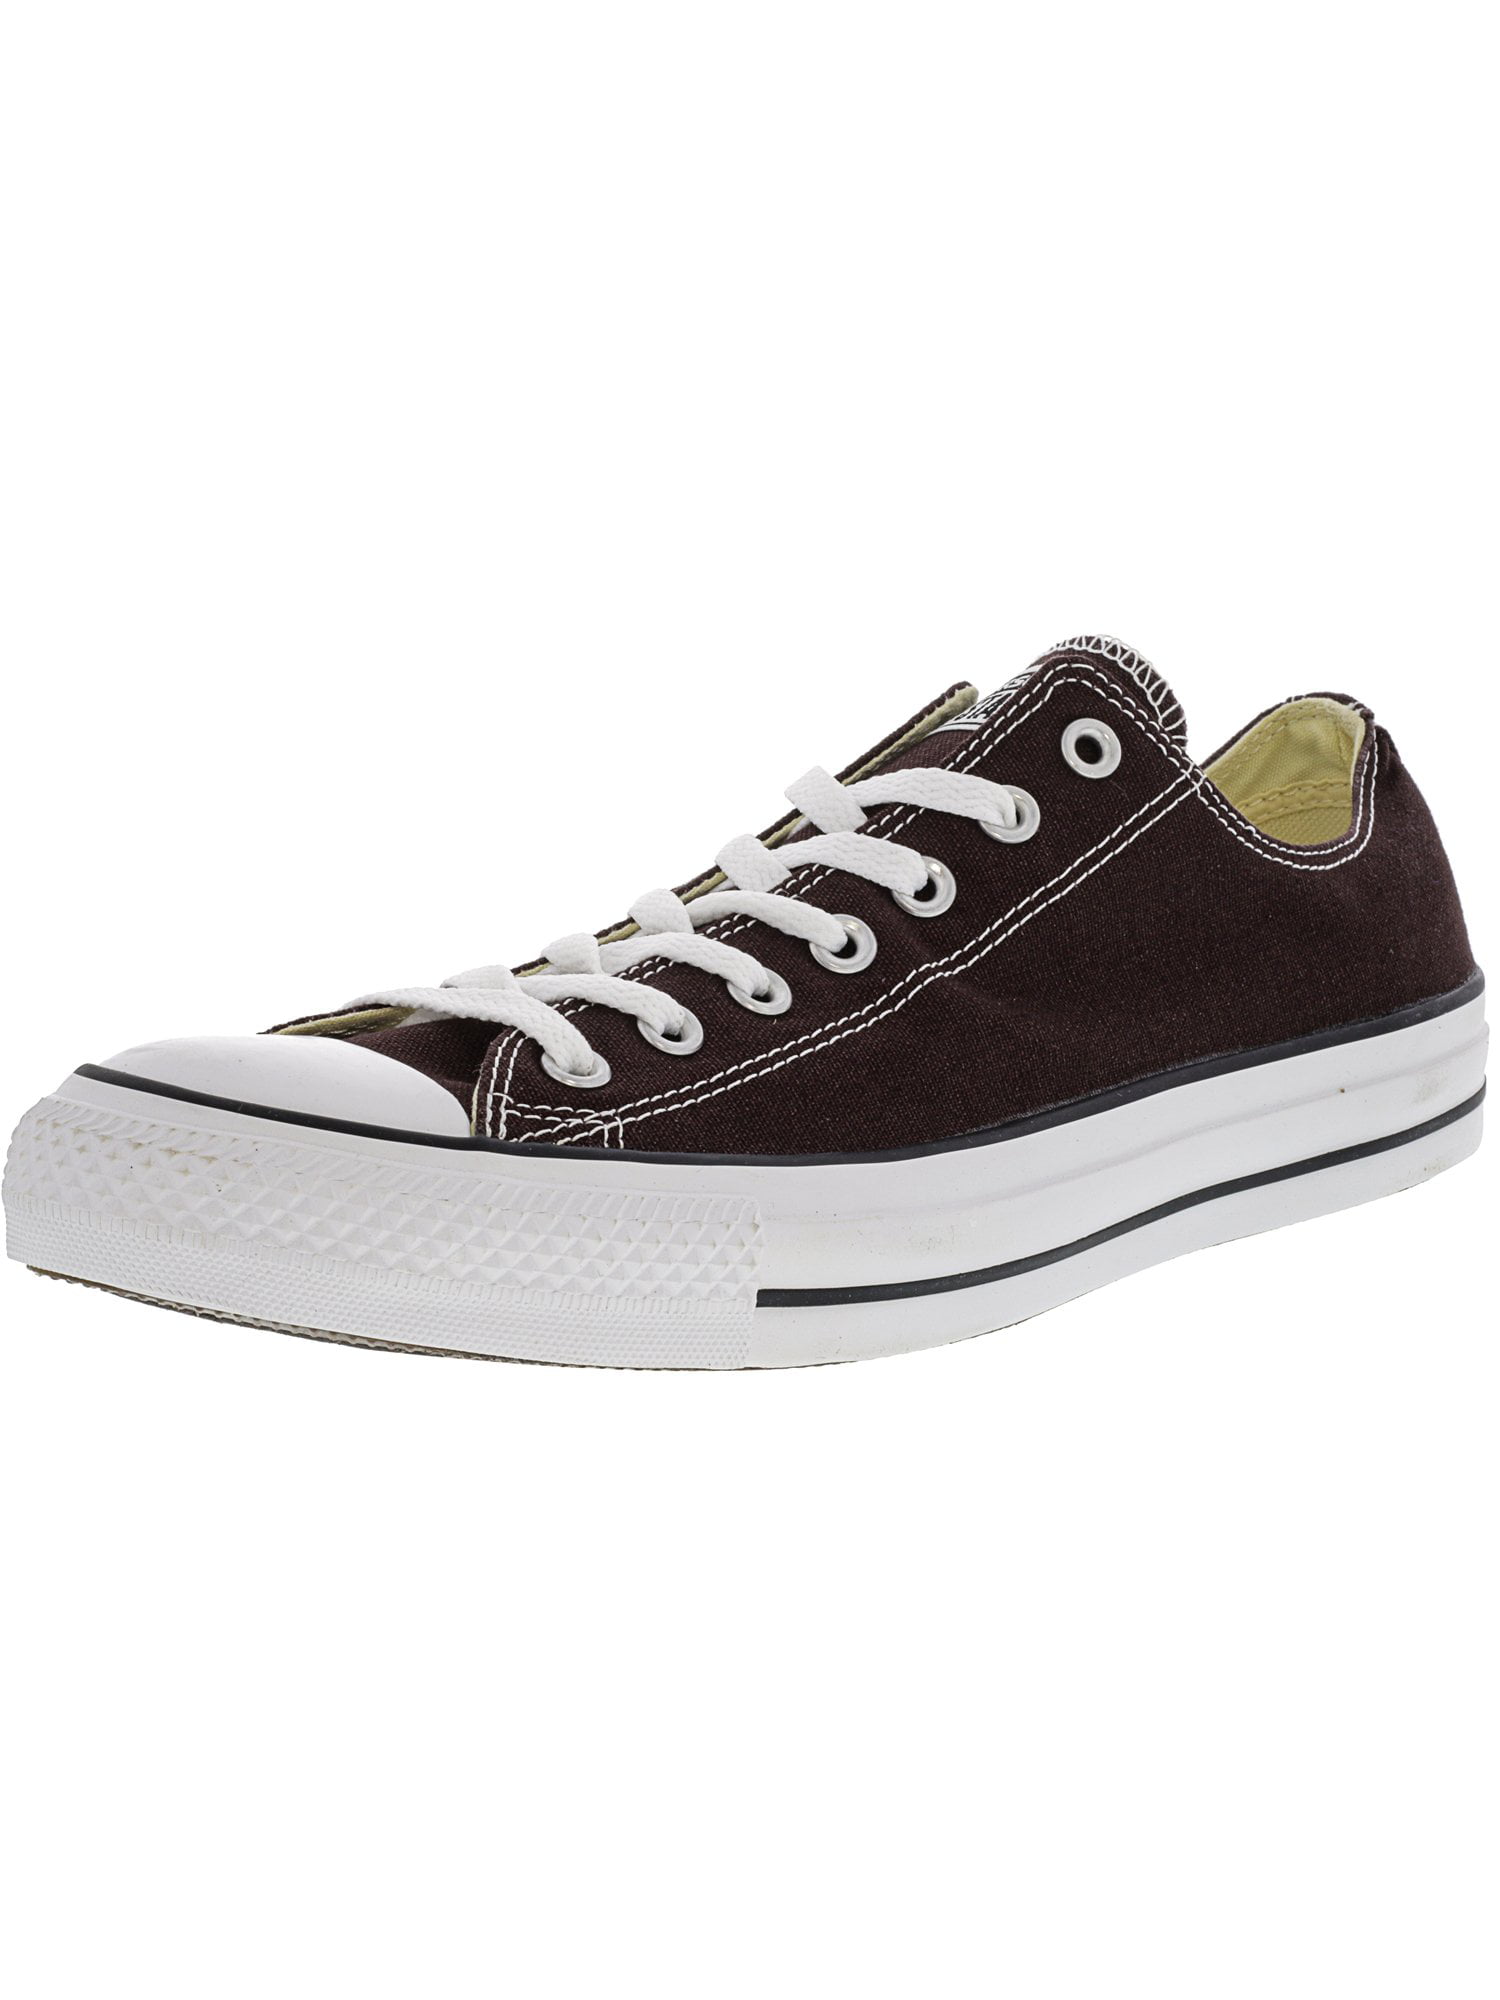 Converse Chuck Taylor All Star Seasonal Ox Burnt Umber Ankle-High Fashion  Sneaker - 12M / 10M 